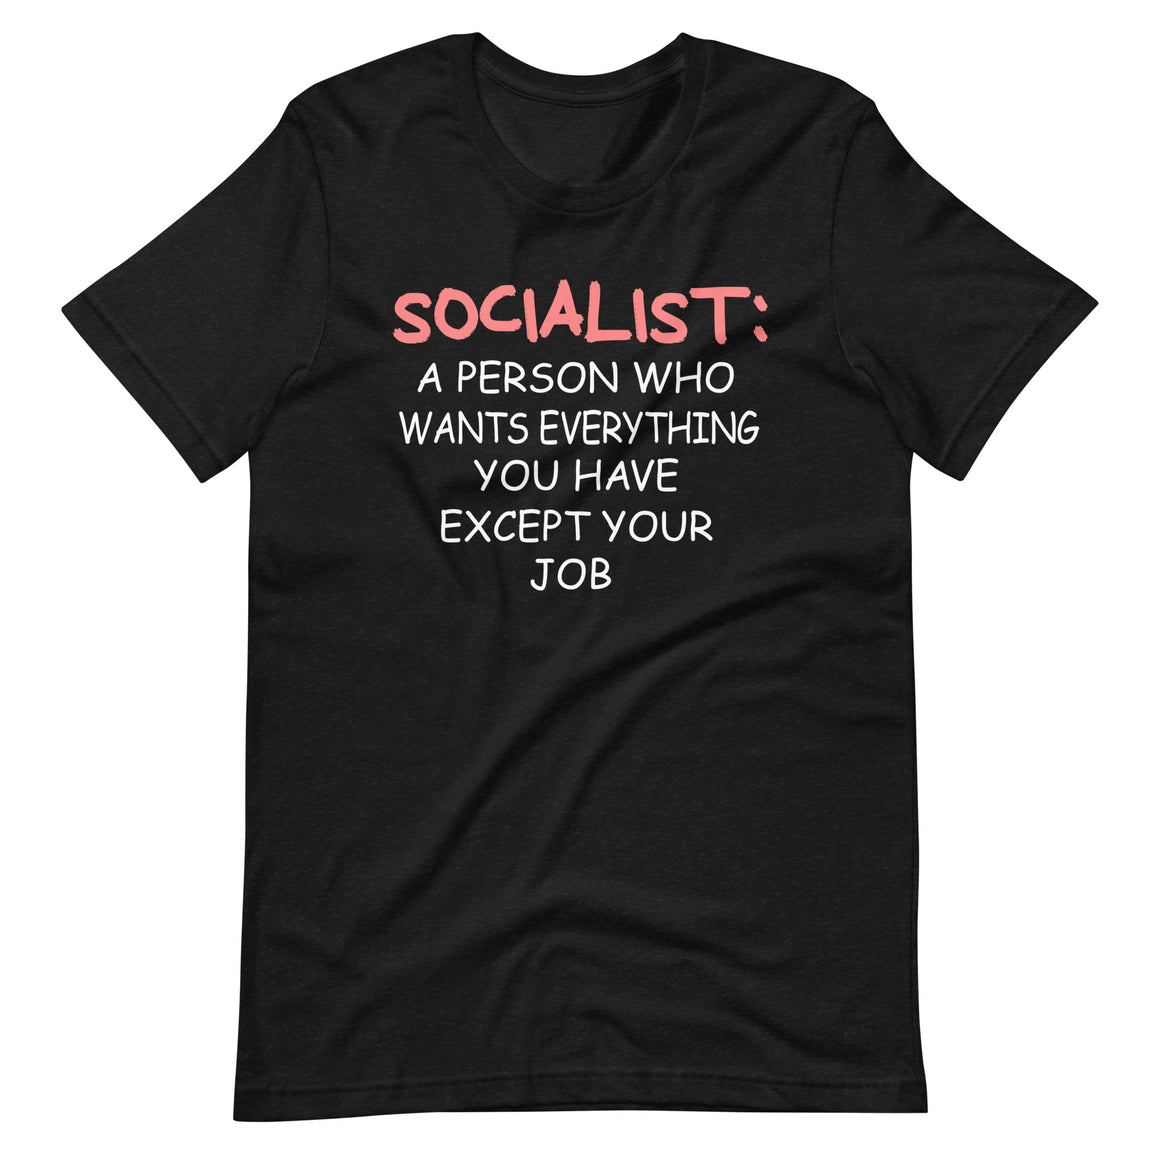 Socialist a Person Who Wants Everything You Have Except Your Job Shirt by Libertarian Country